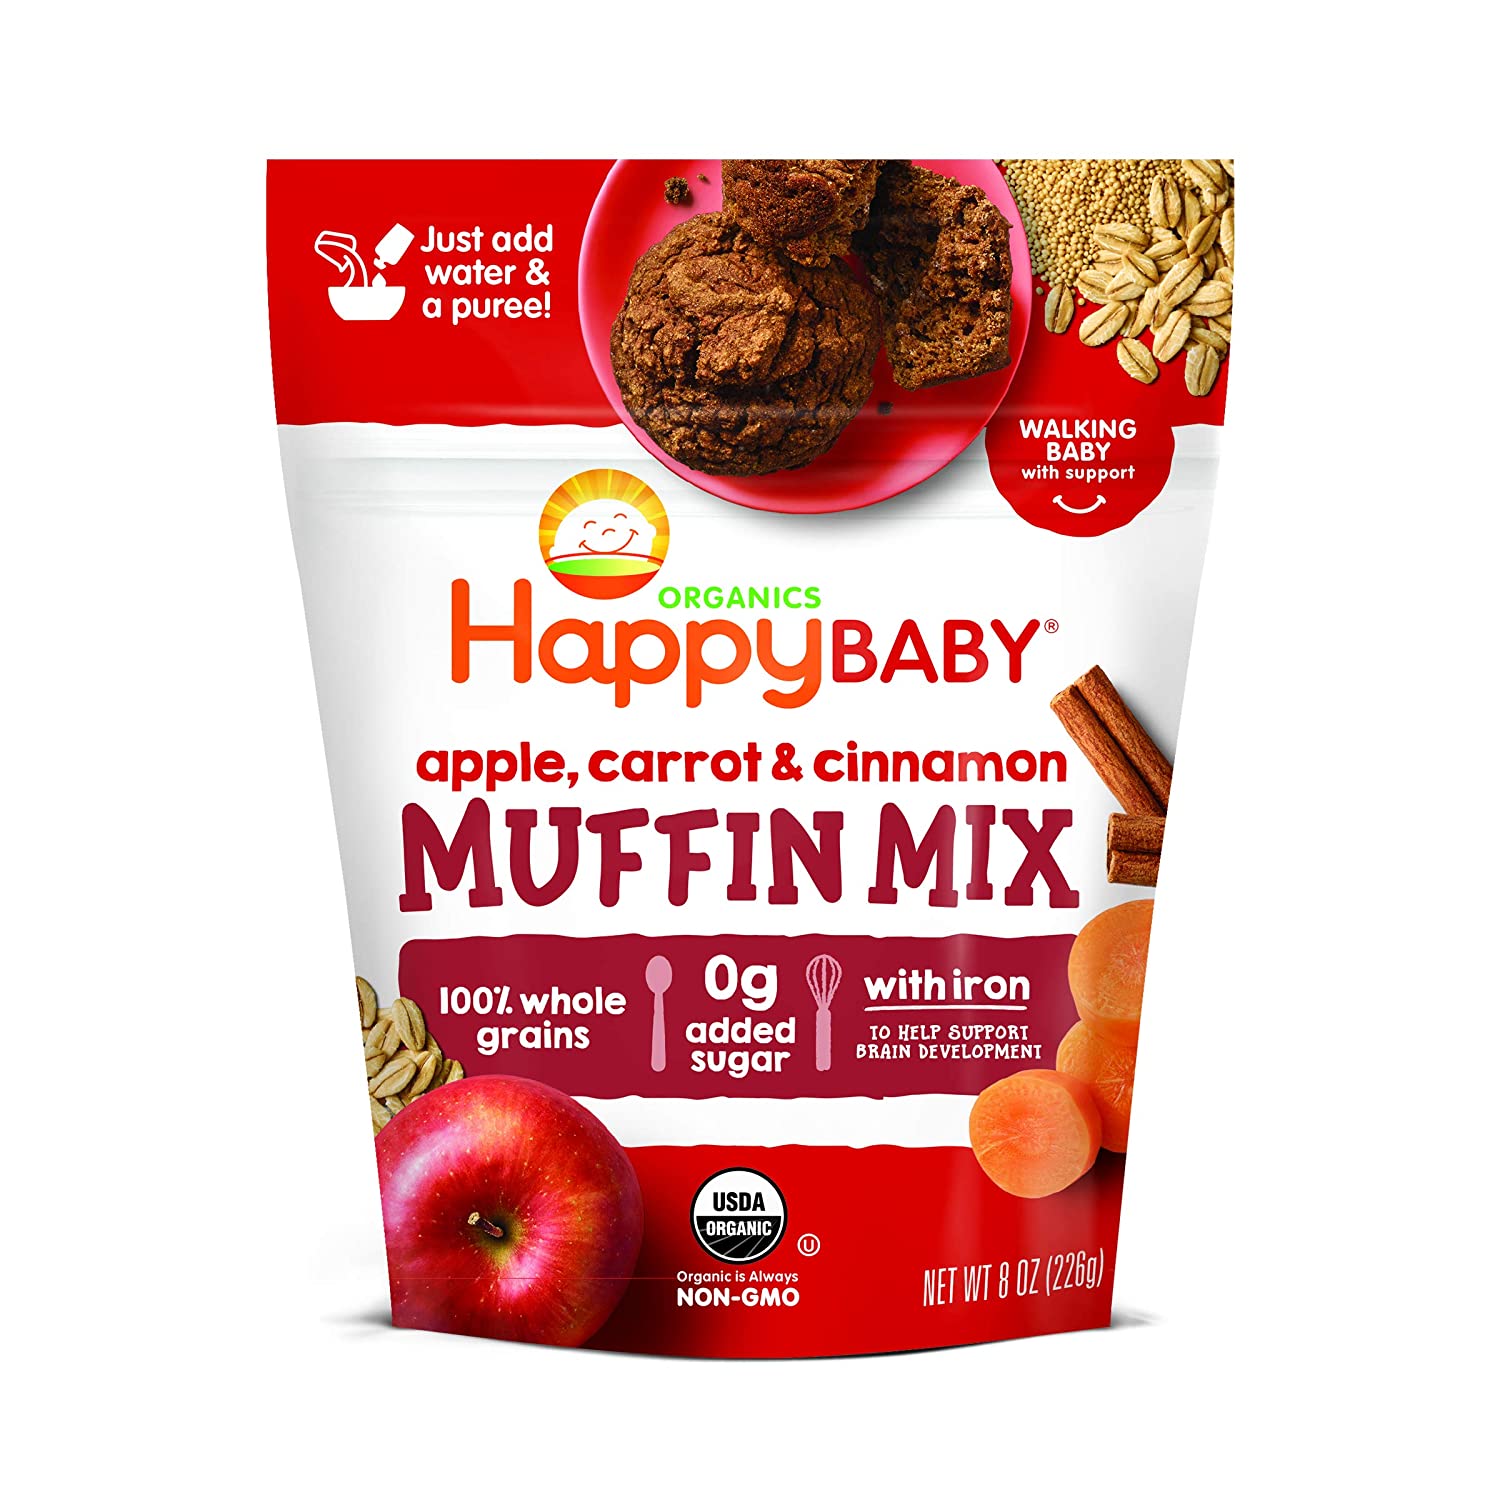 Happy Baby Organics Muffin Mix, Apple Carrot & Cinnamon, 8 Ounce Pouch (Pack of 1)